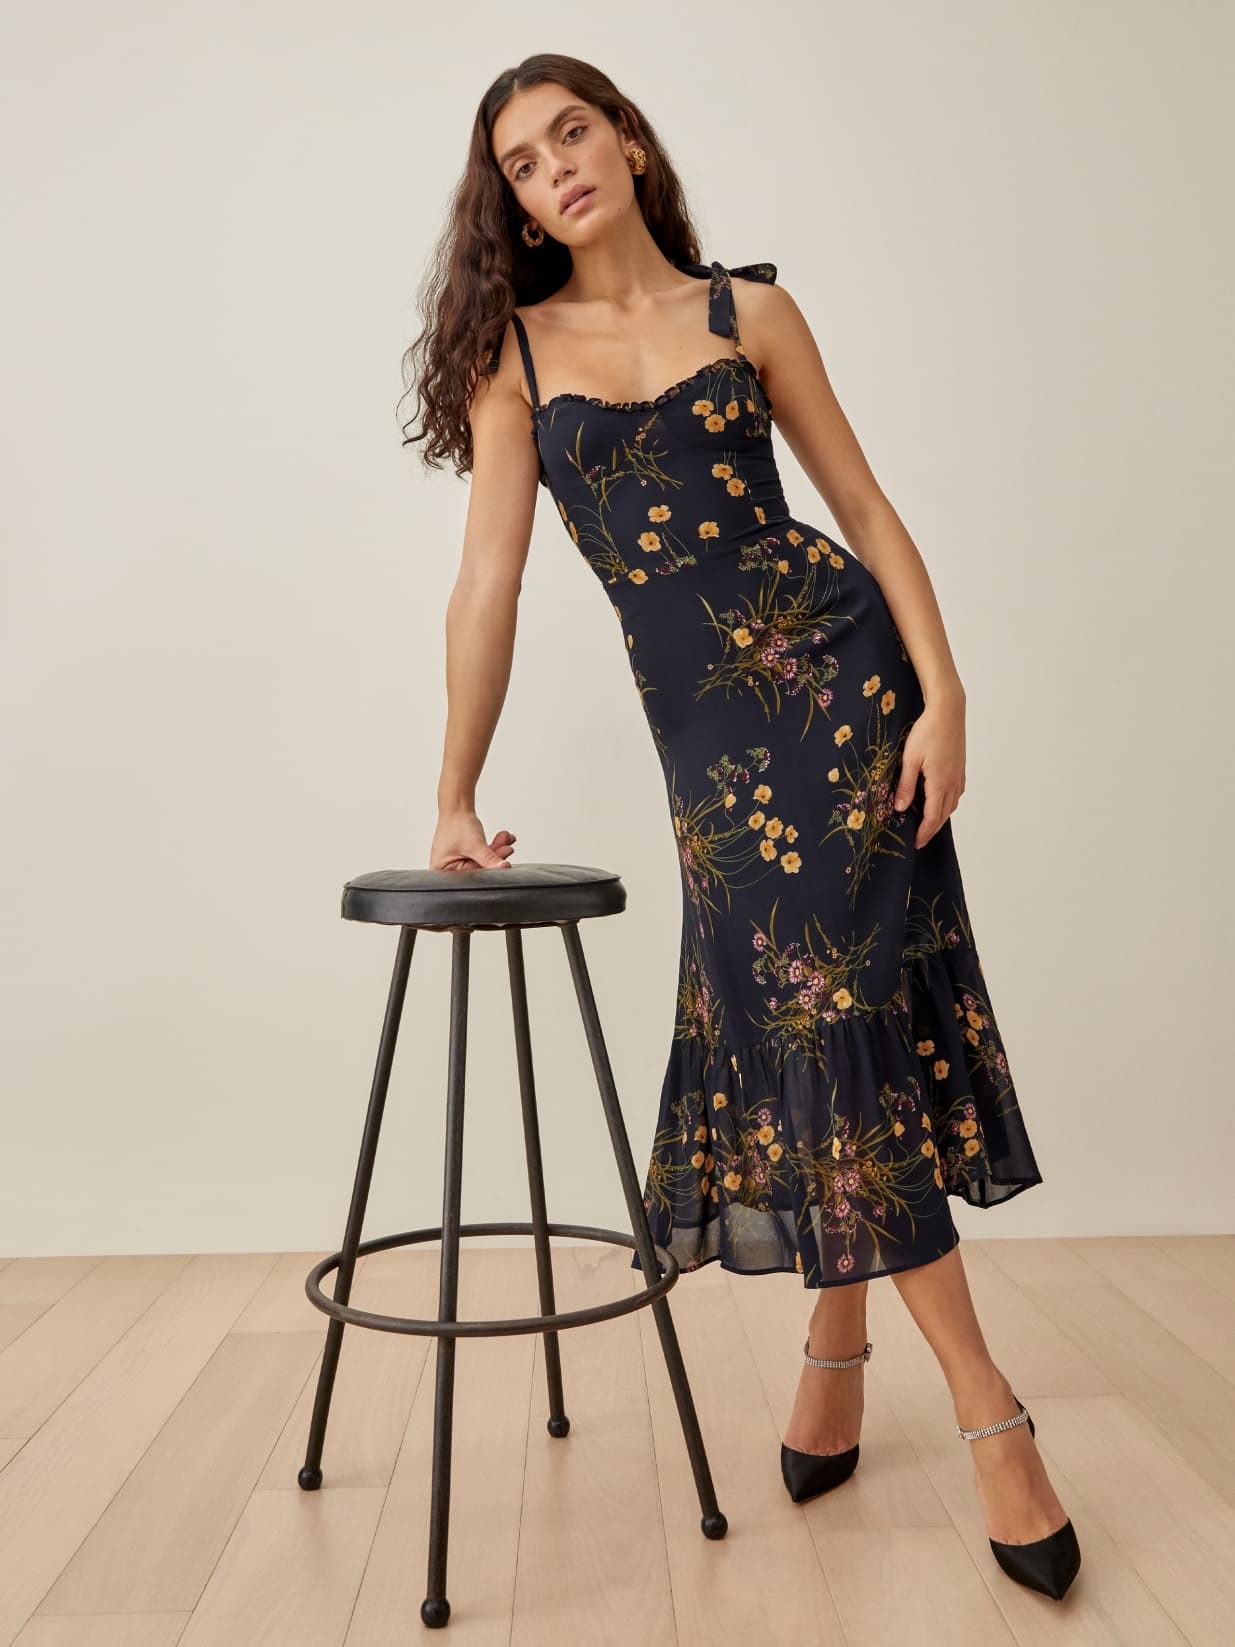 the navy floral printed dress